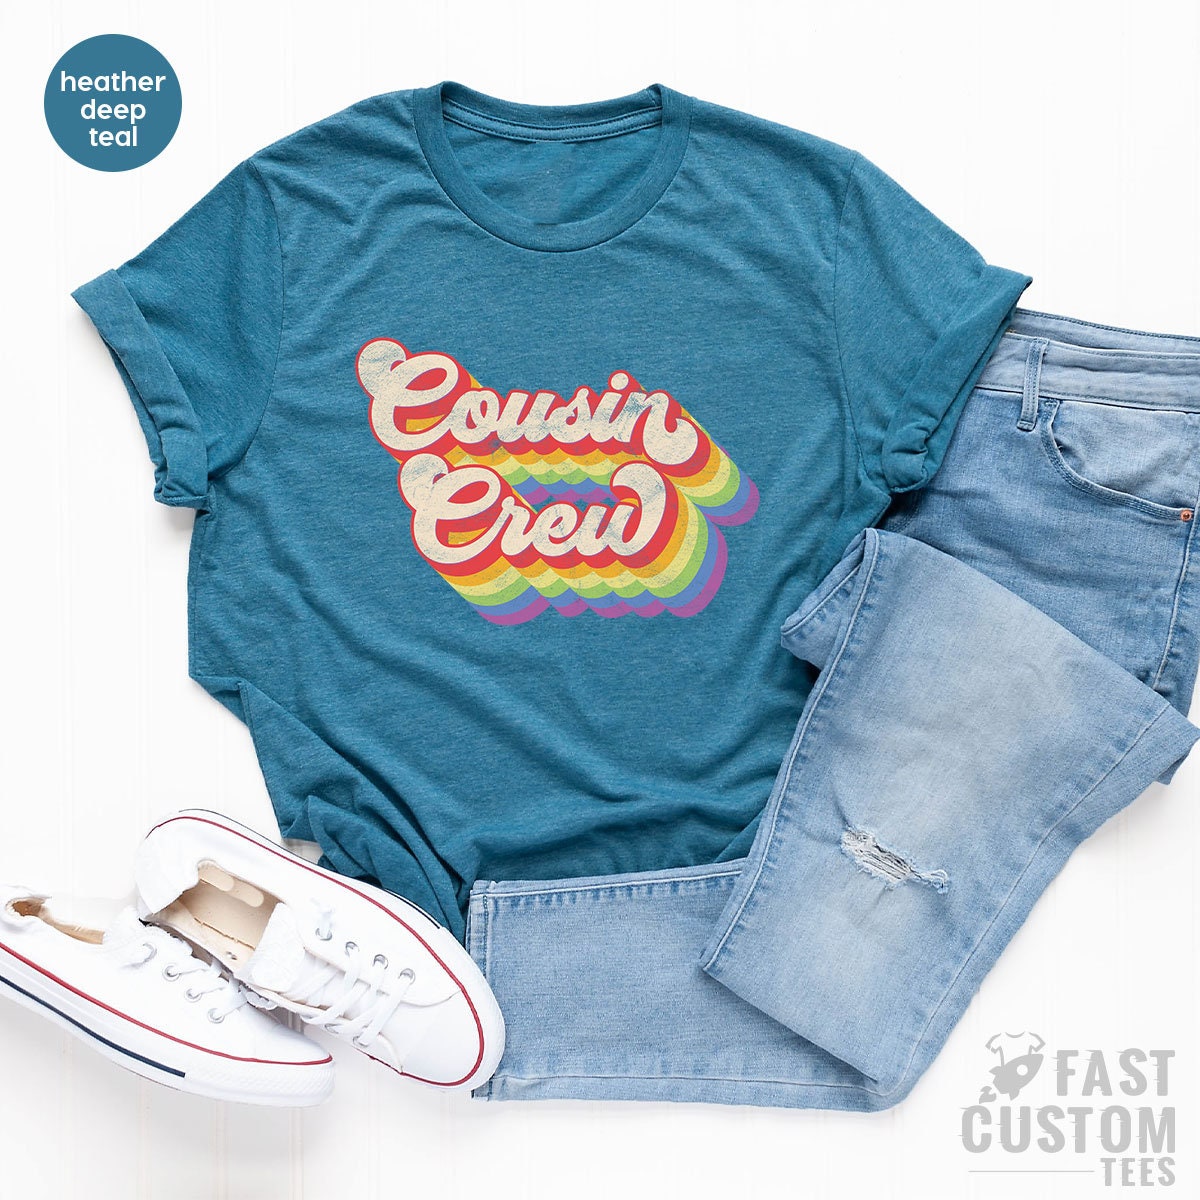 Cousin Crew Shirts, Matching Family Shirts, Family Cousin Gifts, Cousin T-Shirt, Cousin Tshirts, Funny Shirts For Family - Fastdeliverytees.com